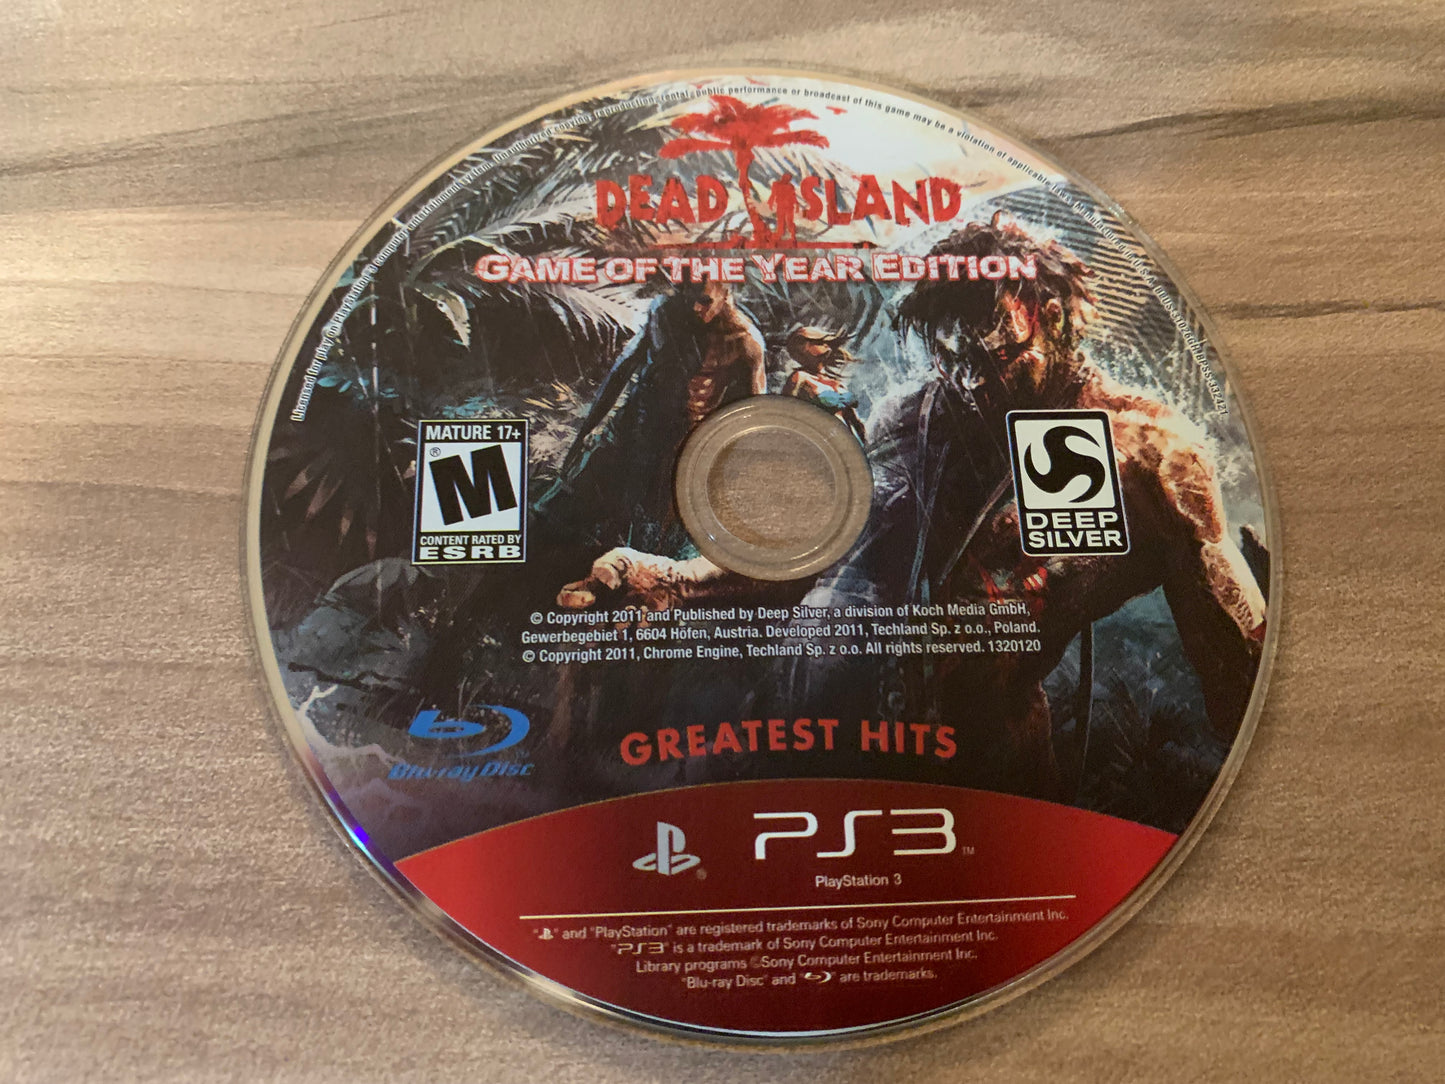 SONY PLAYSTATiON 3 [PS3] | DEAD iSLAND | GREATEST HiTS GAME OF THE YEAR EDiTiON